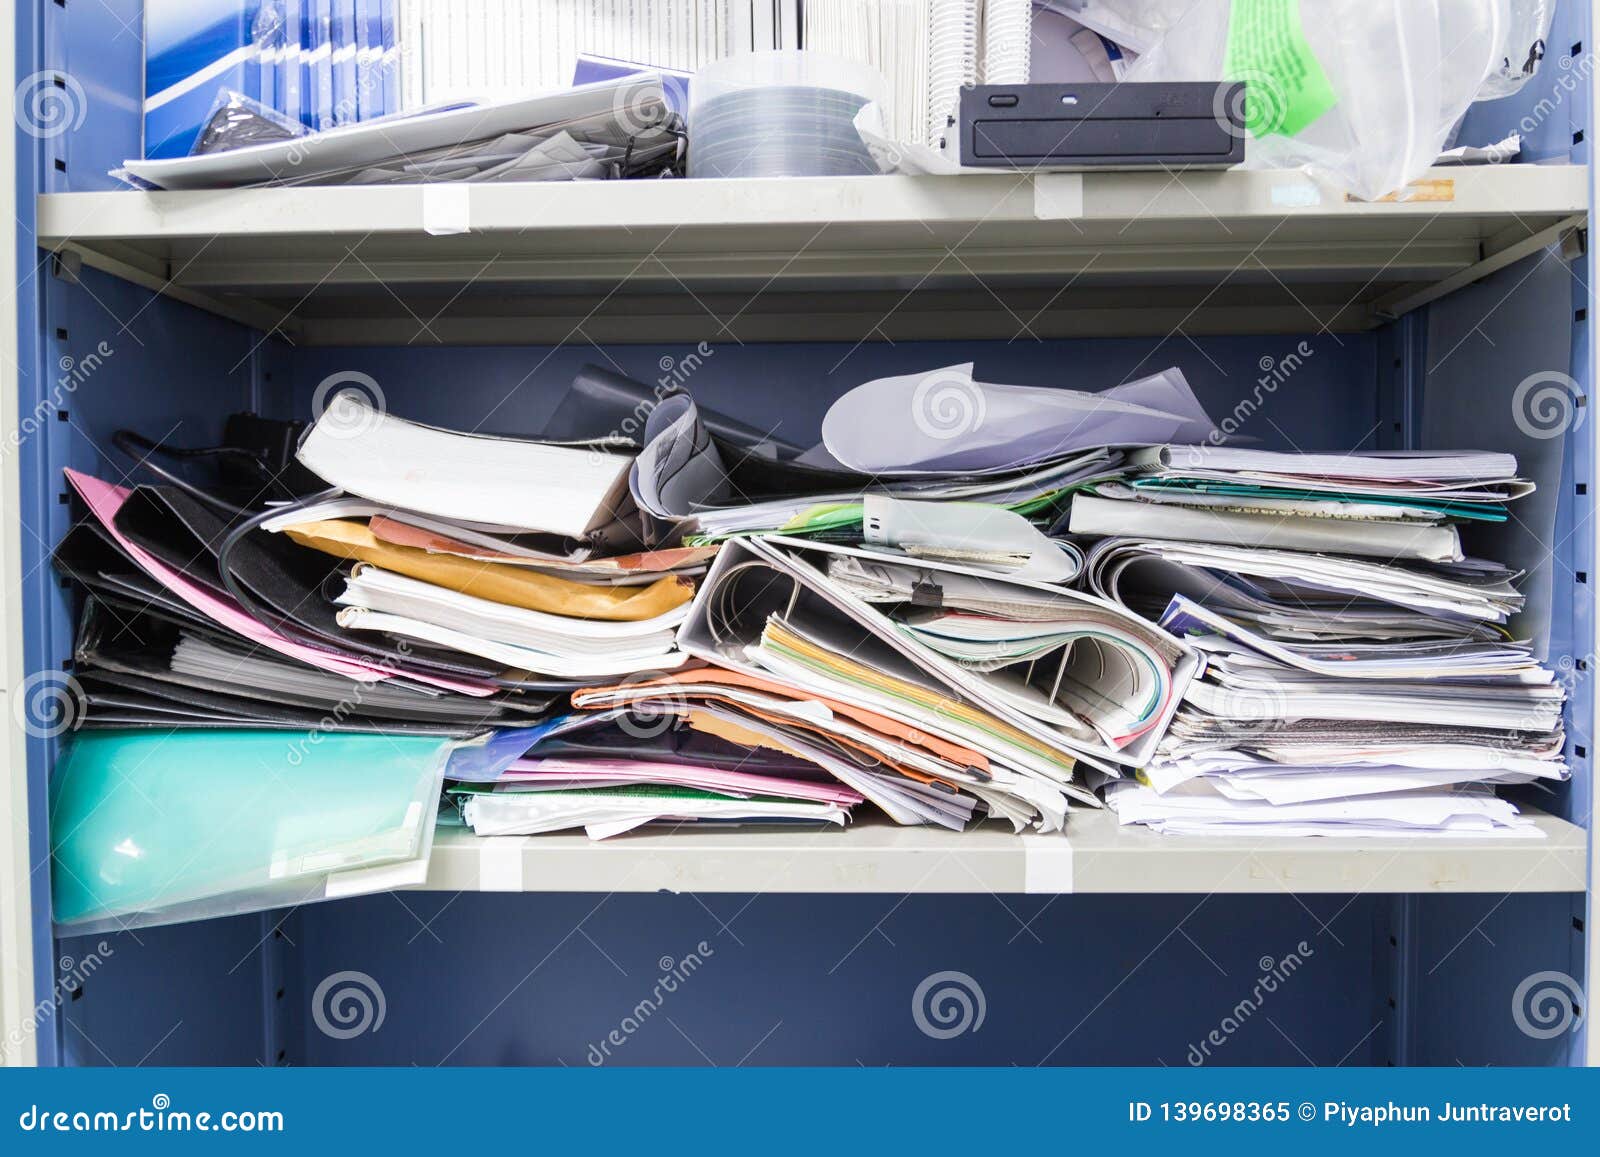 Messy File Document And Office Supplies In Filing Cabinets Stock